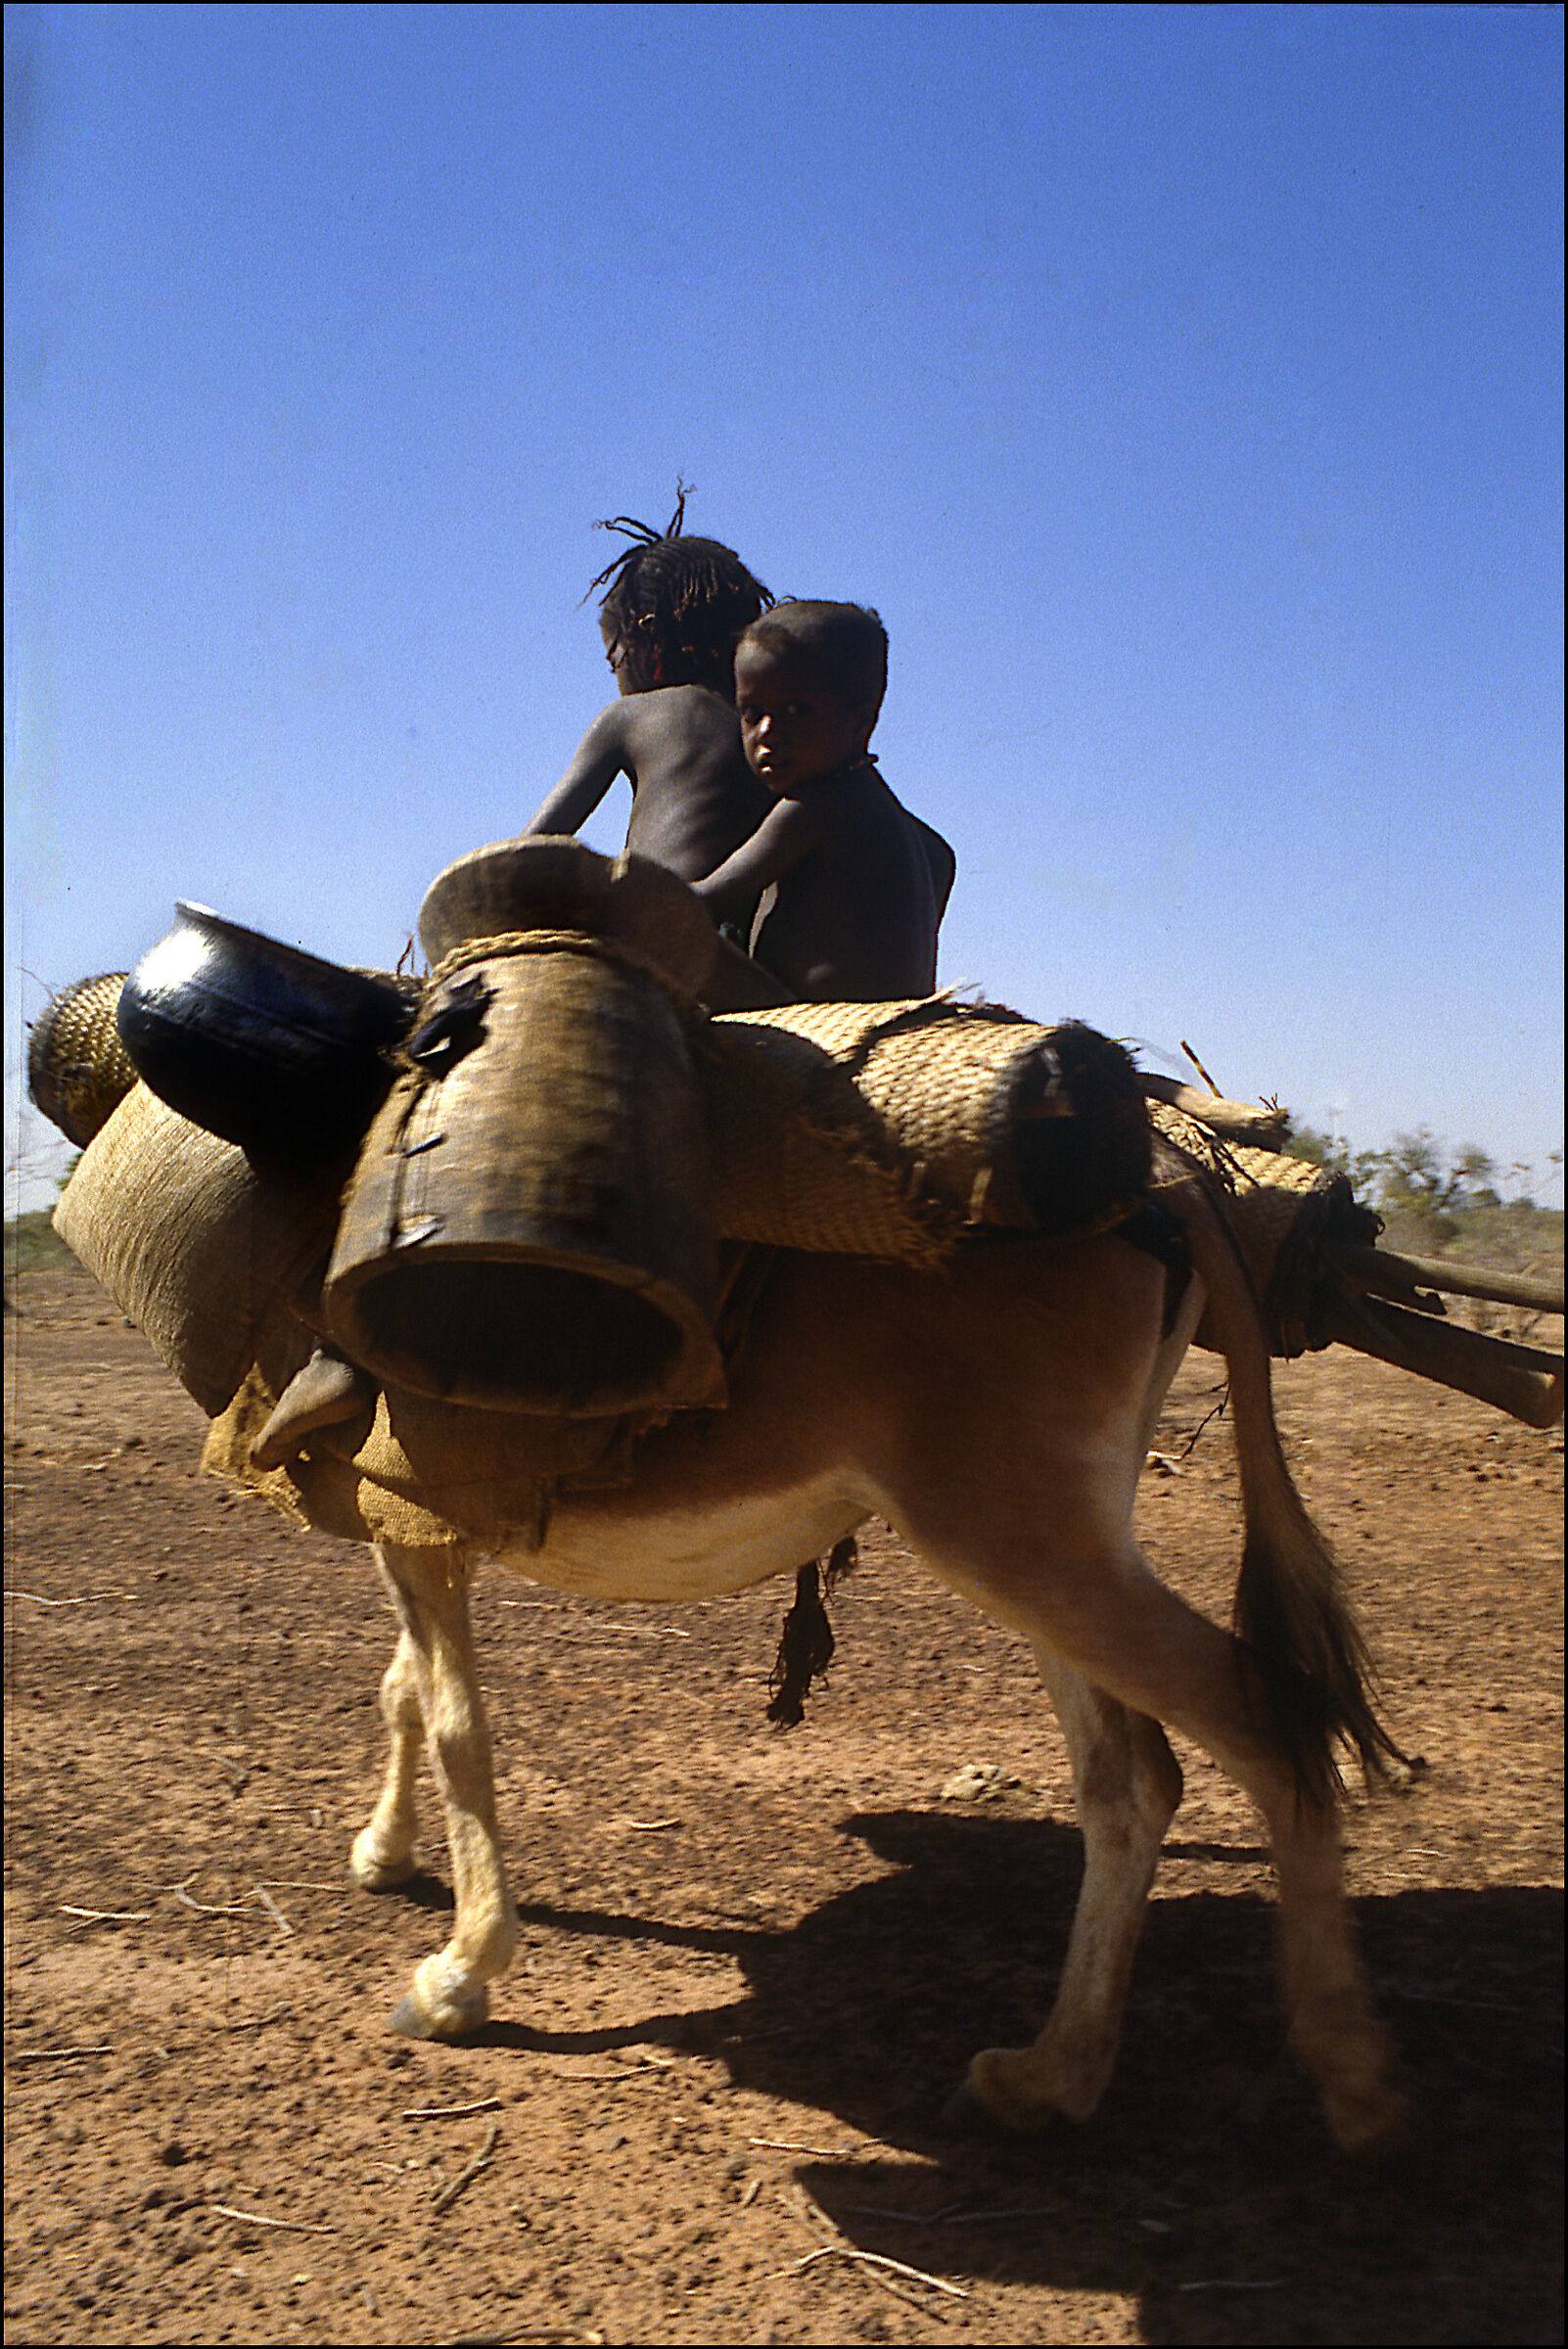 1985 Mali "nomads in the shael"...